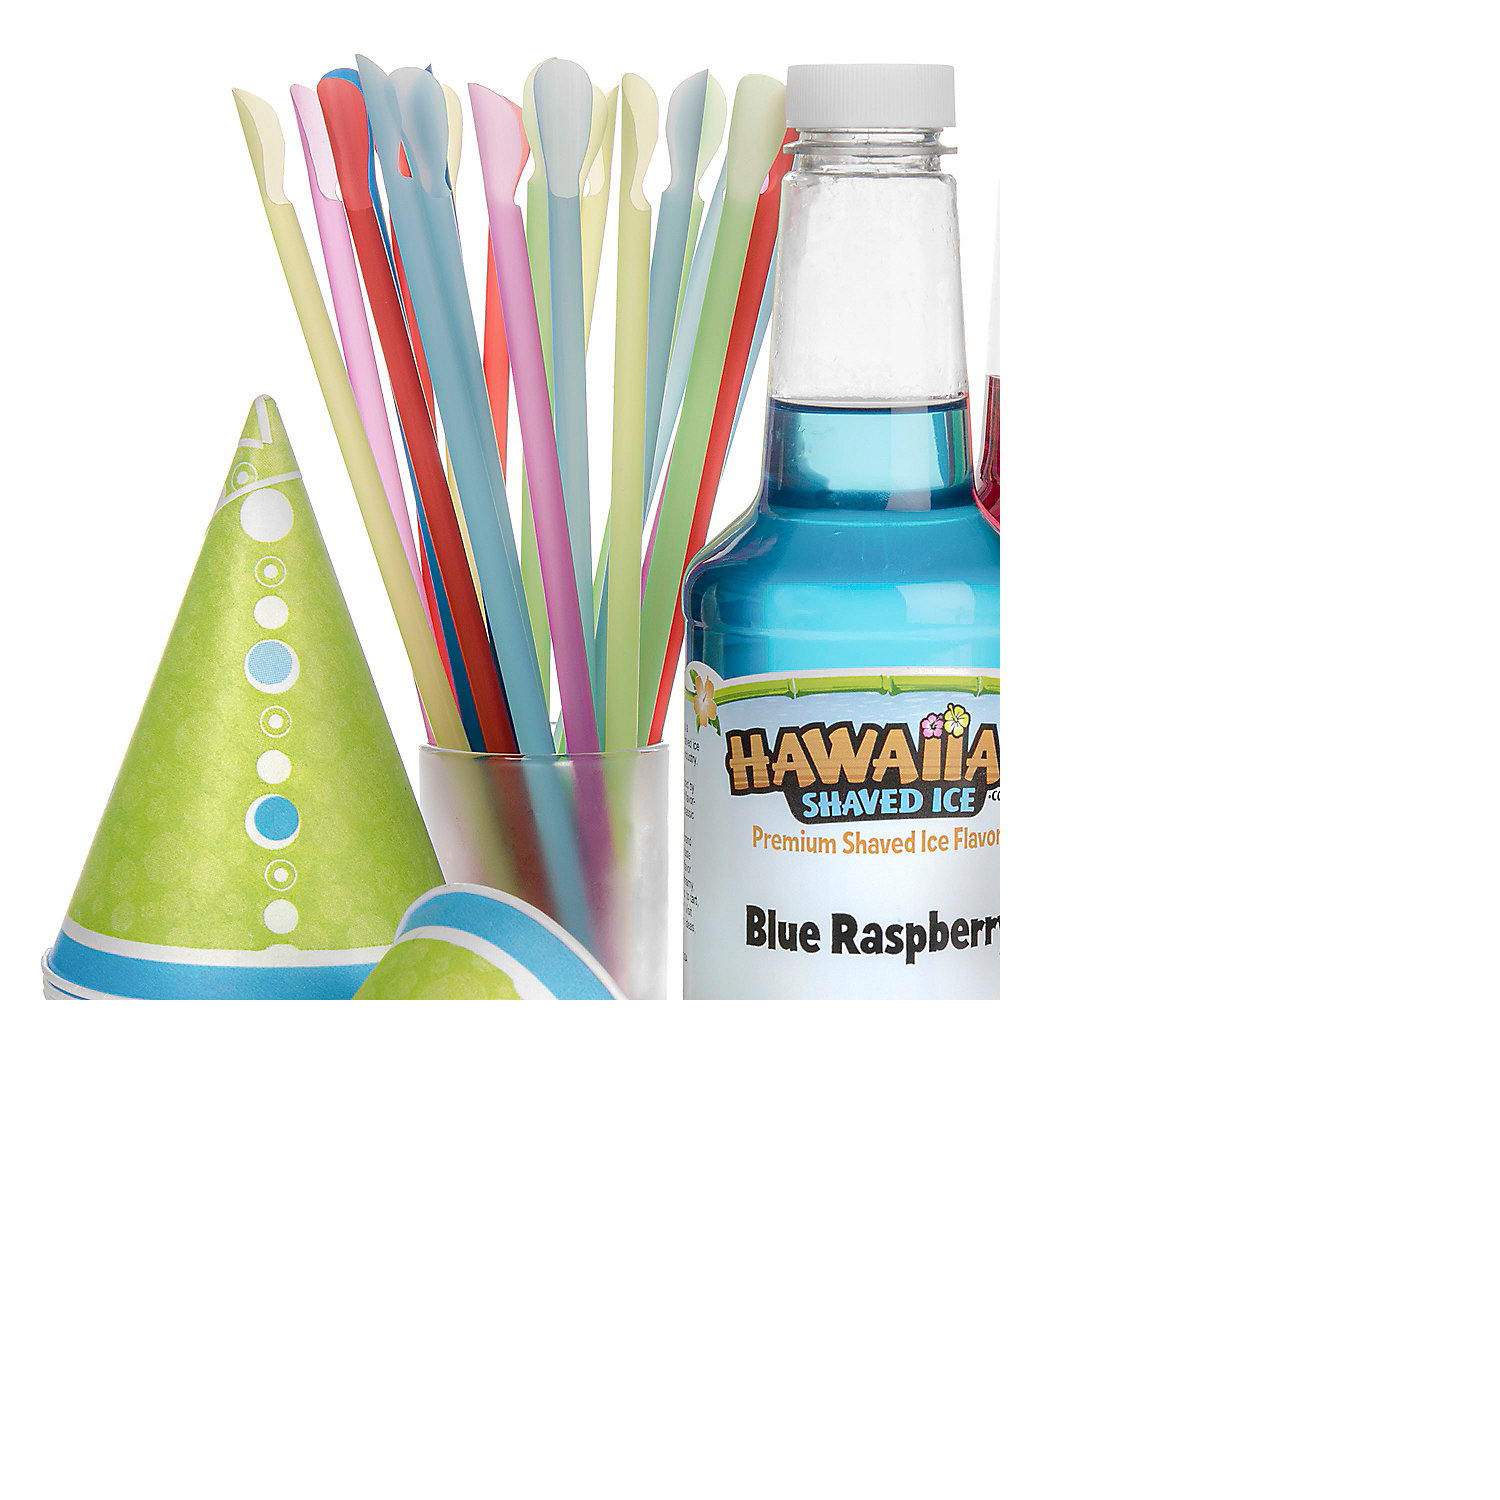 Party Fun Hawaiian Shaved Ice 3 Flavor Fun Pack Of Snow Cone Syrup Kit 